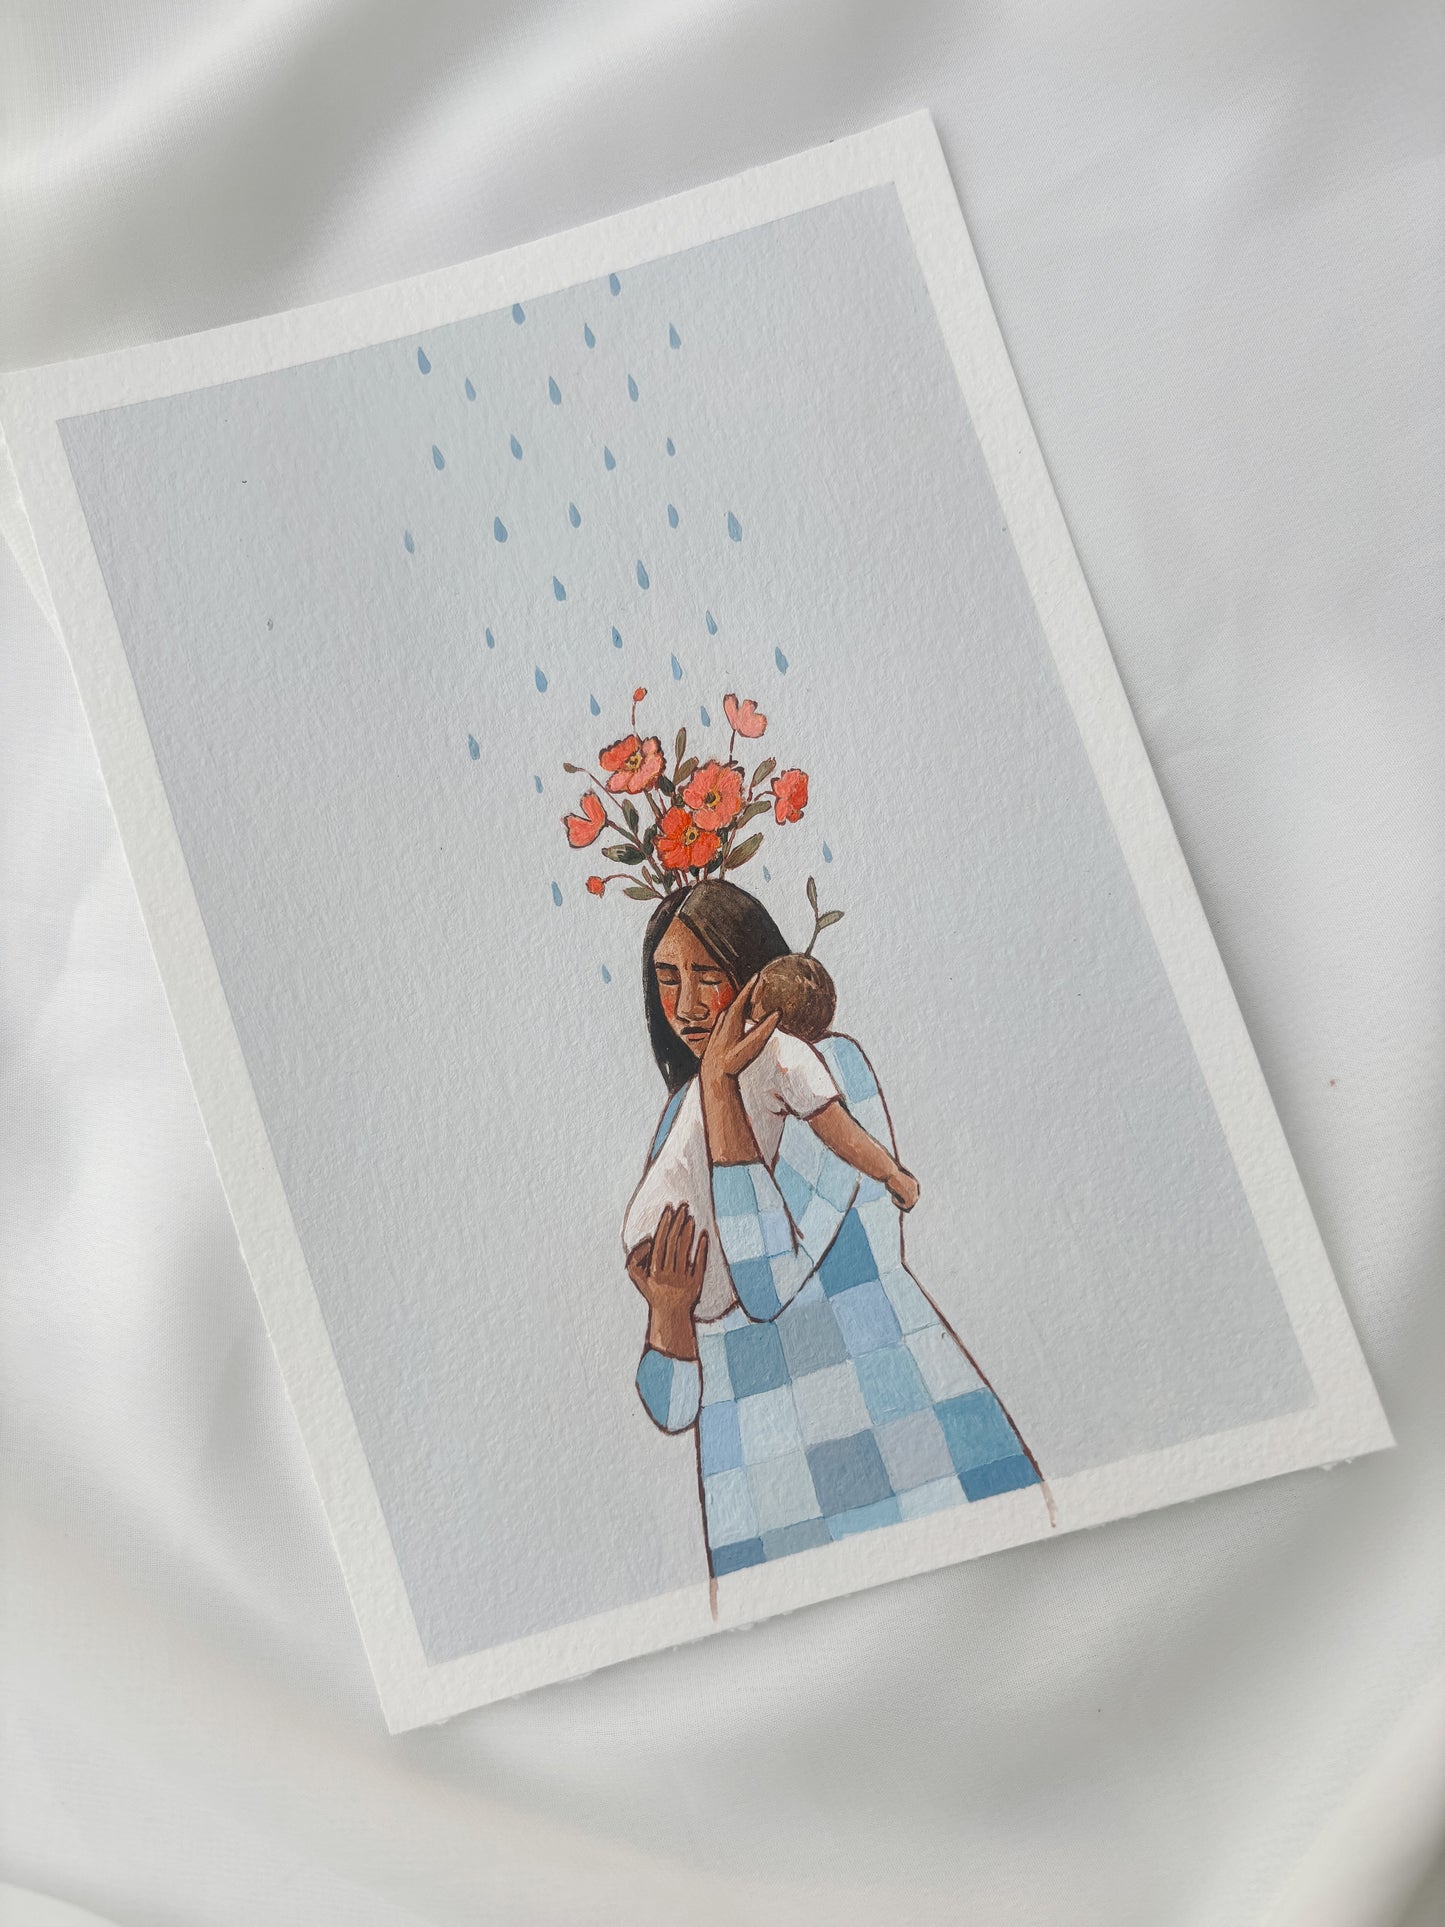 'The Rains Will Help Us Bloom' 5x7 inch original painting